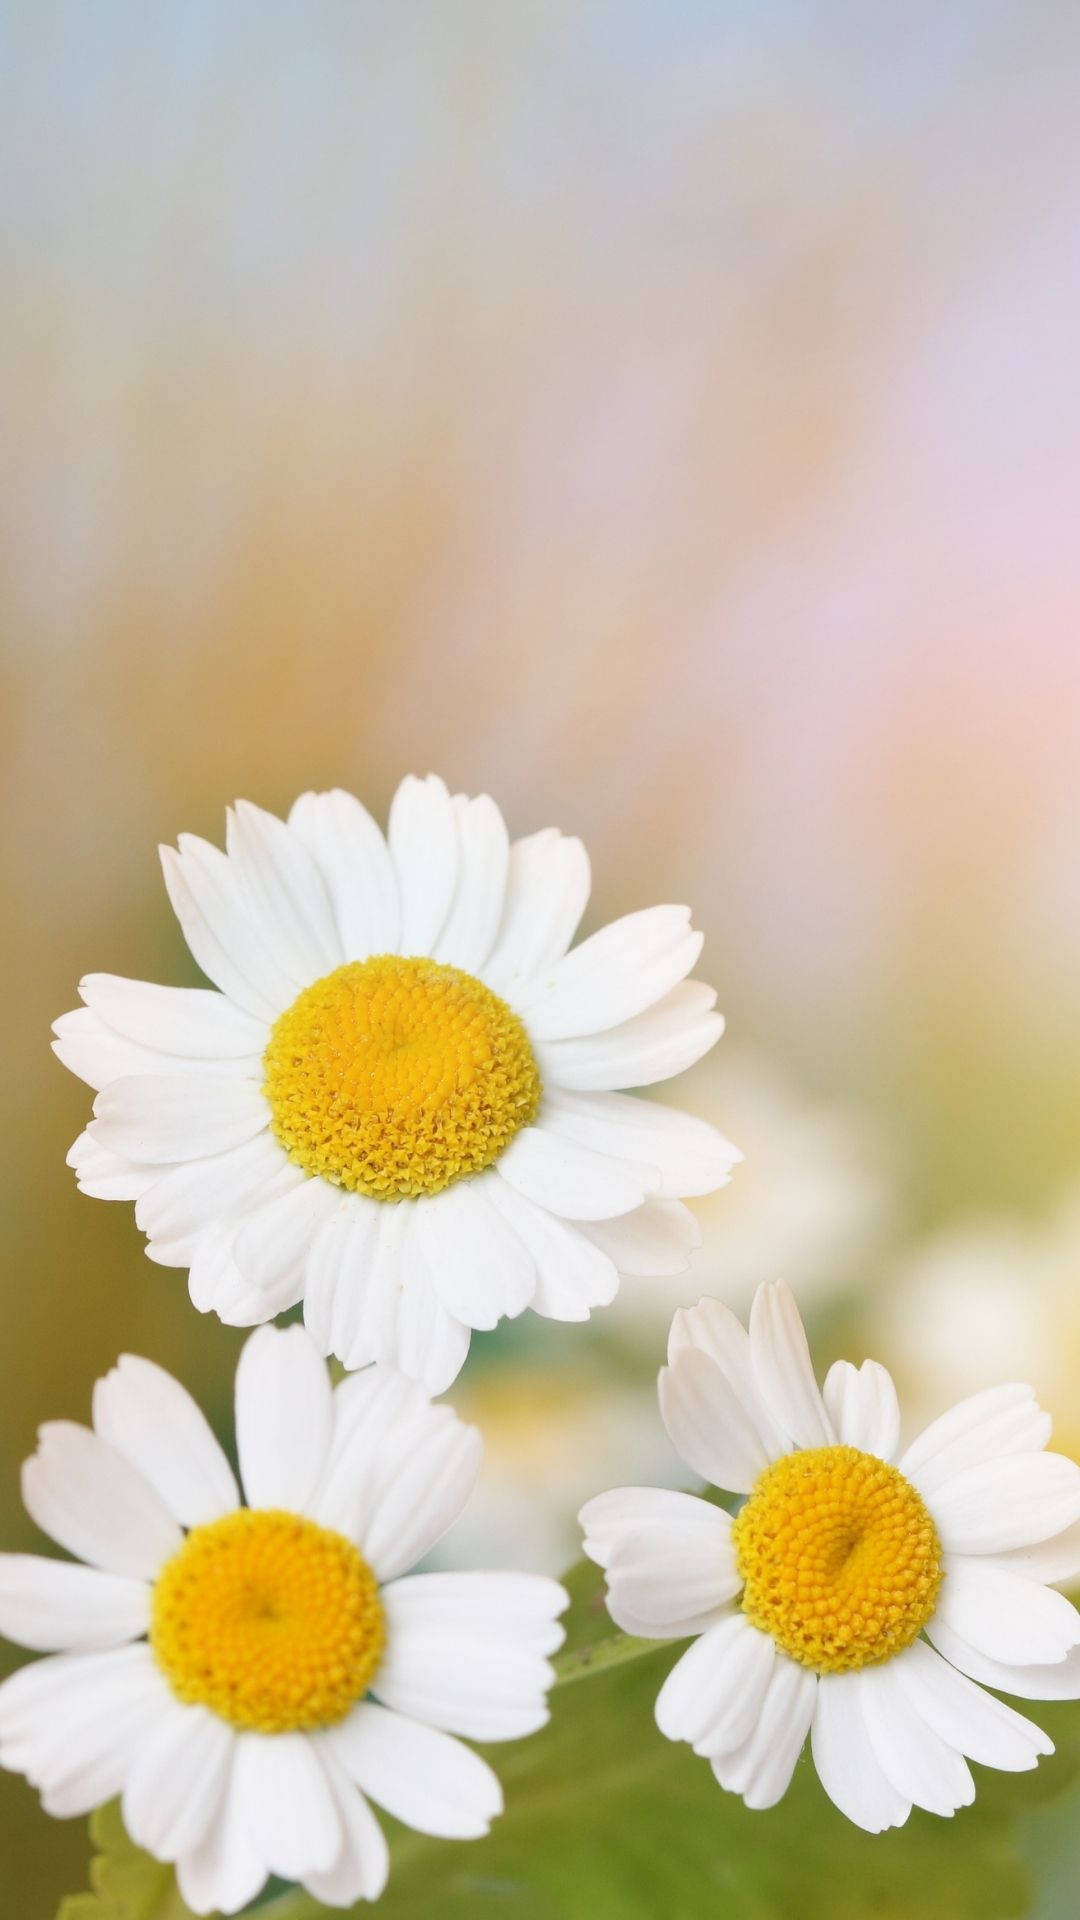 100 Daisy Iphone Wallpapers Wallpapers Com